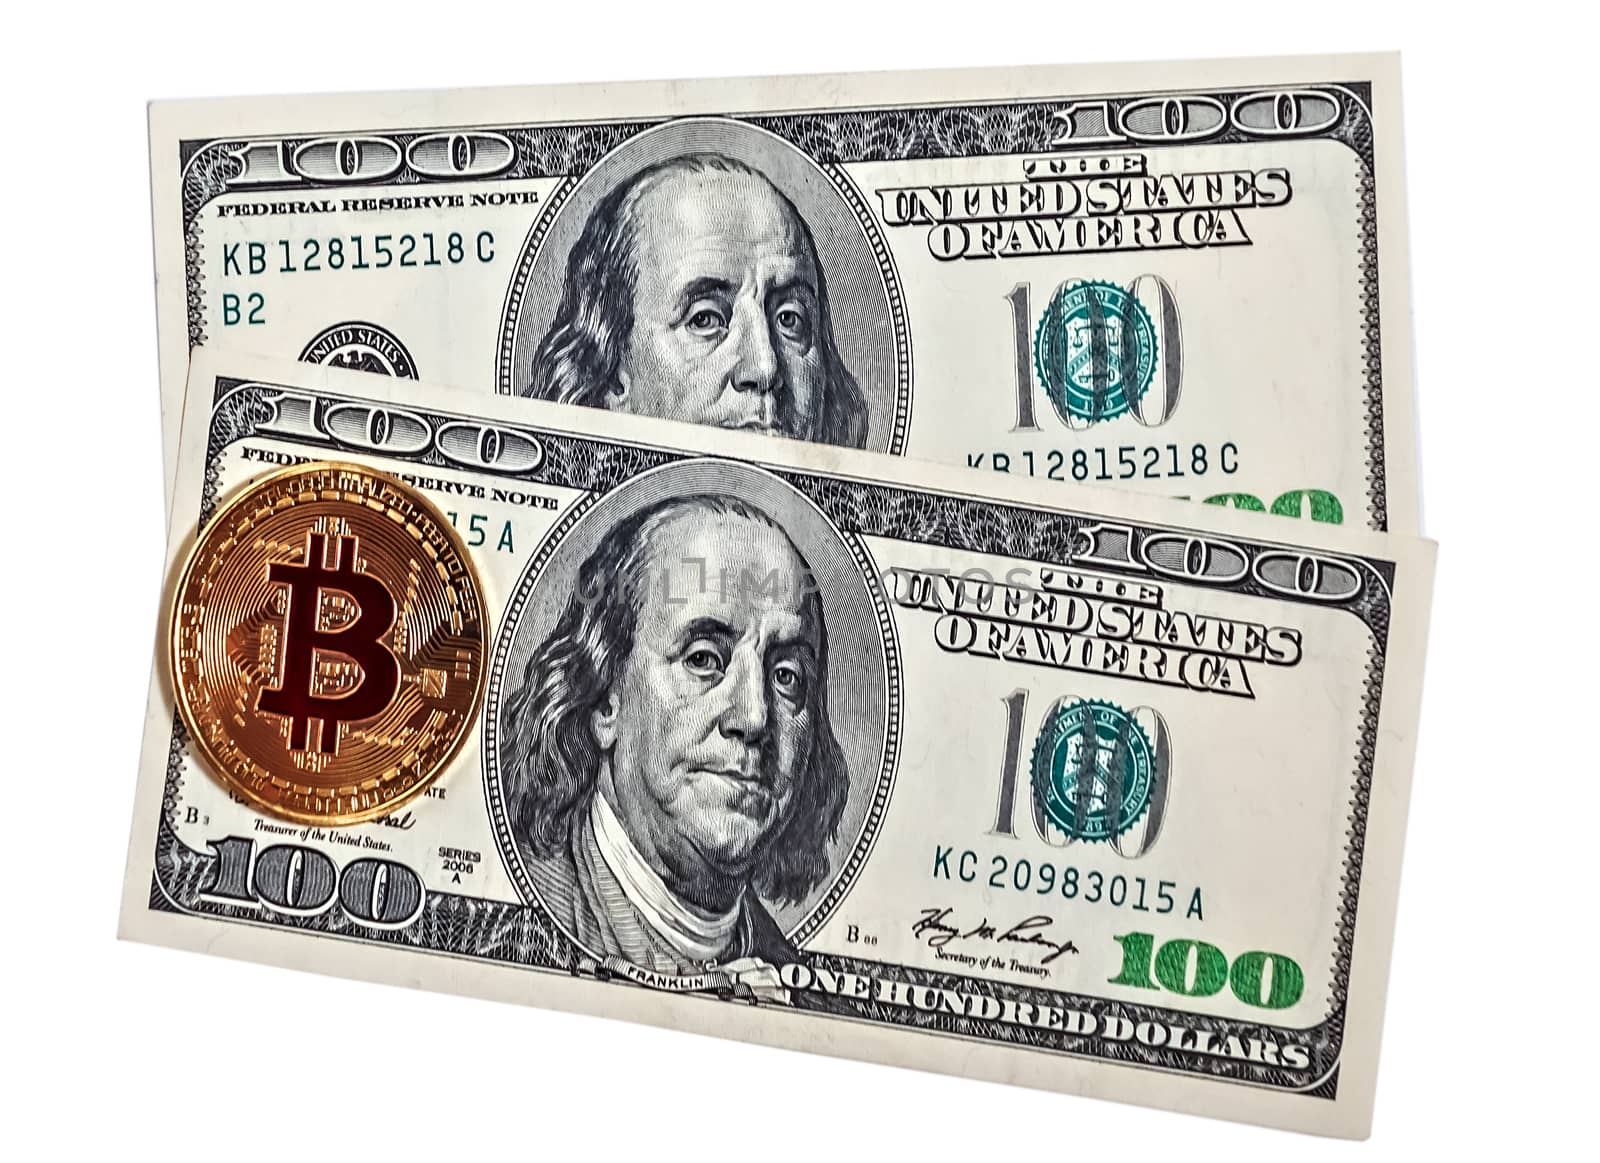 Gold bitcoin coin one hundred dollars bills. Coin exchange usd isolated on white background, cryptocurrency mining concept. Macro portrait of Benjamin Franklin